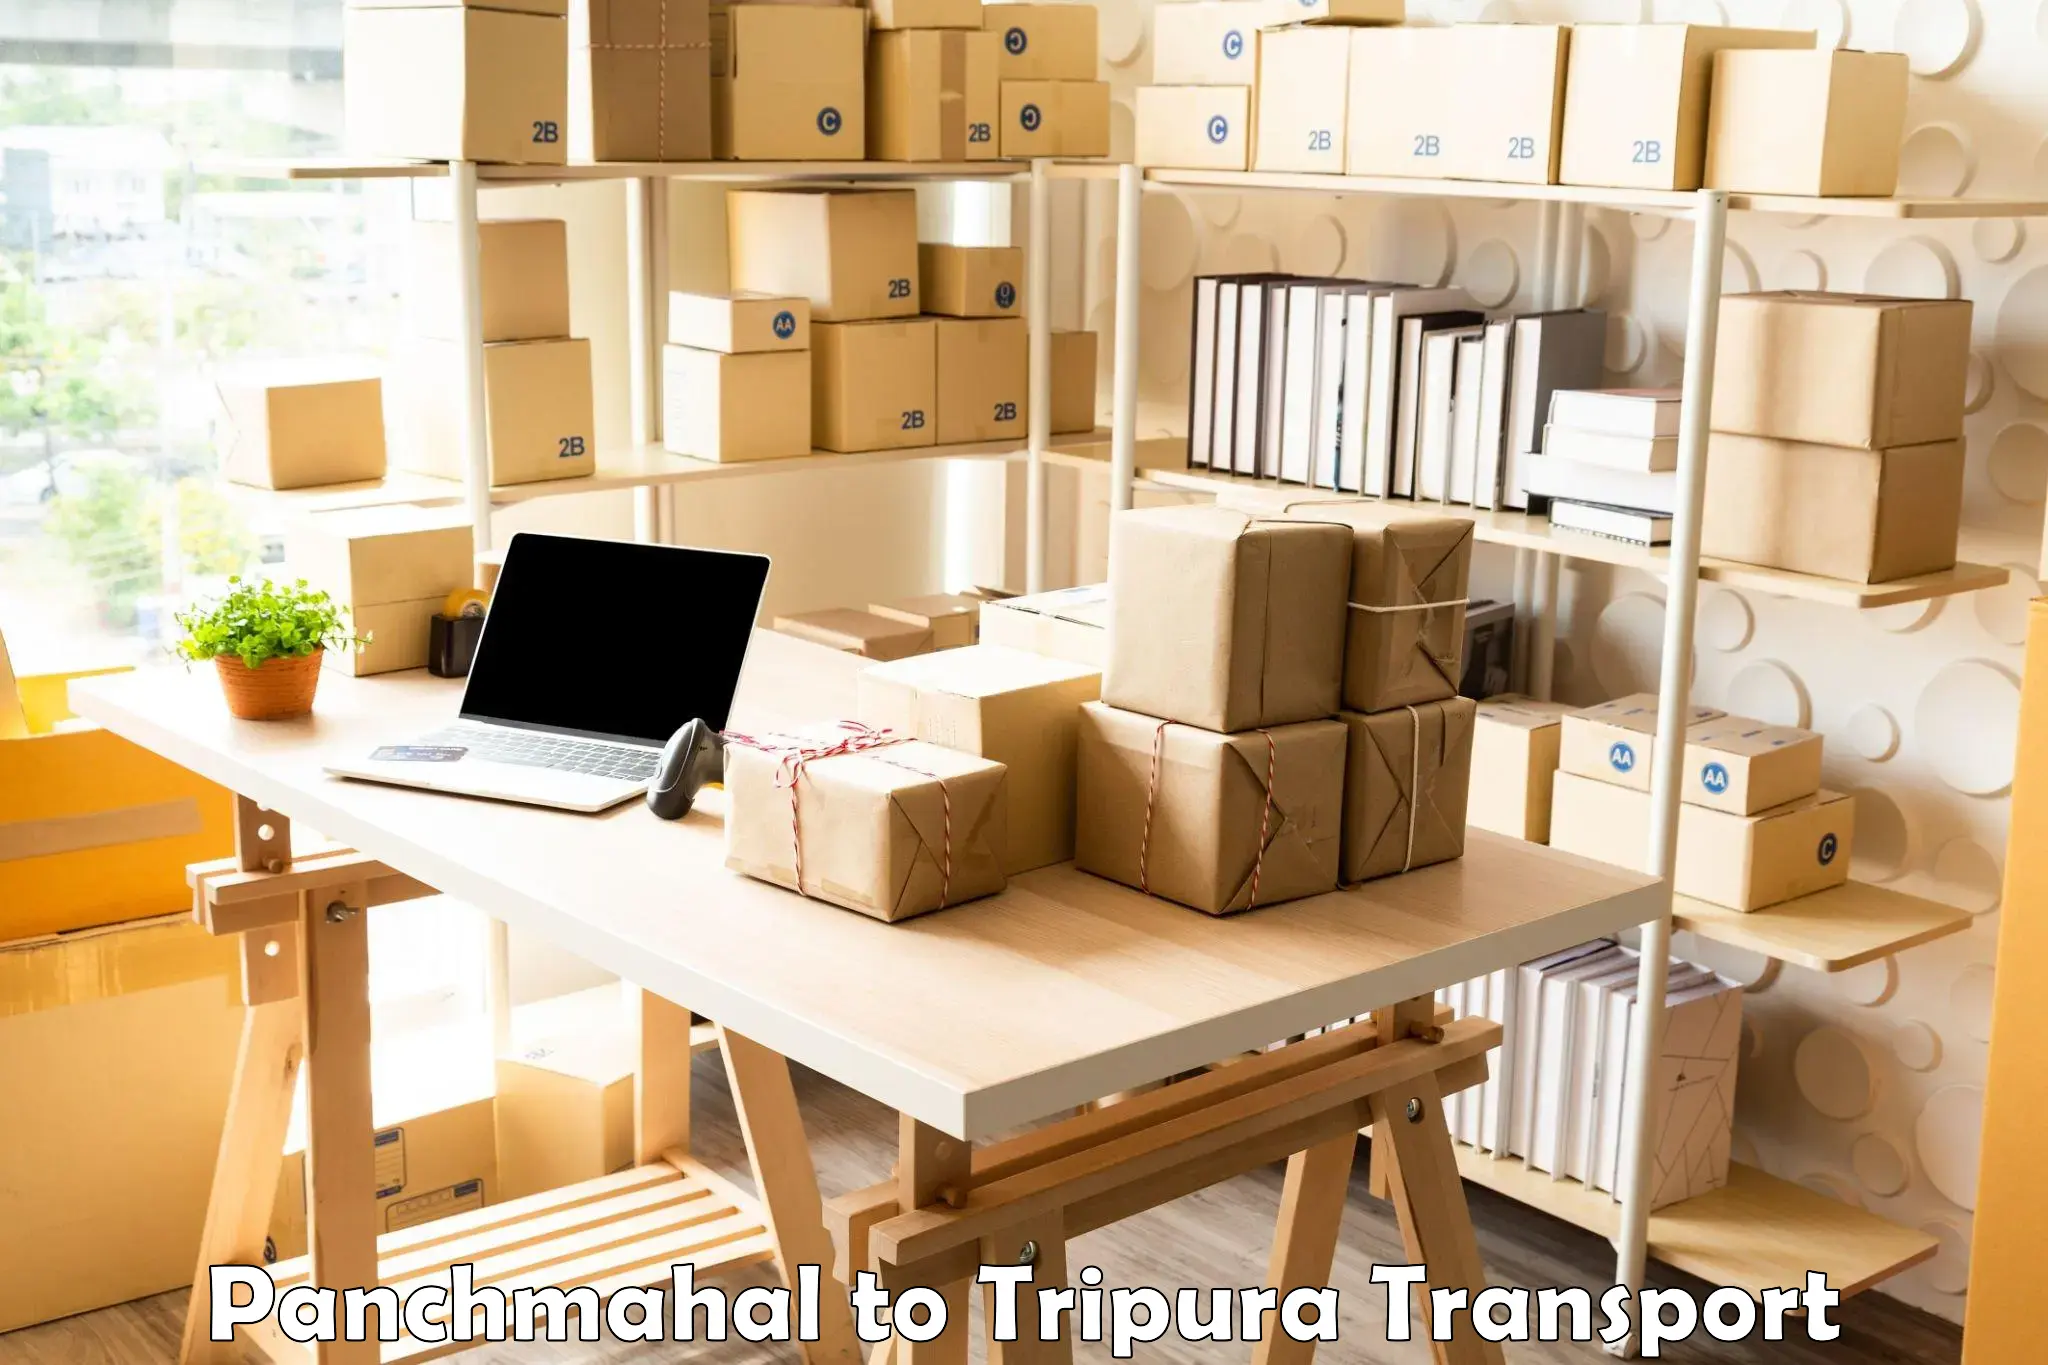 Shipping services in Panchmahal to Udaipur Tripura